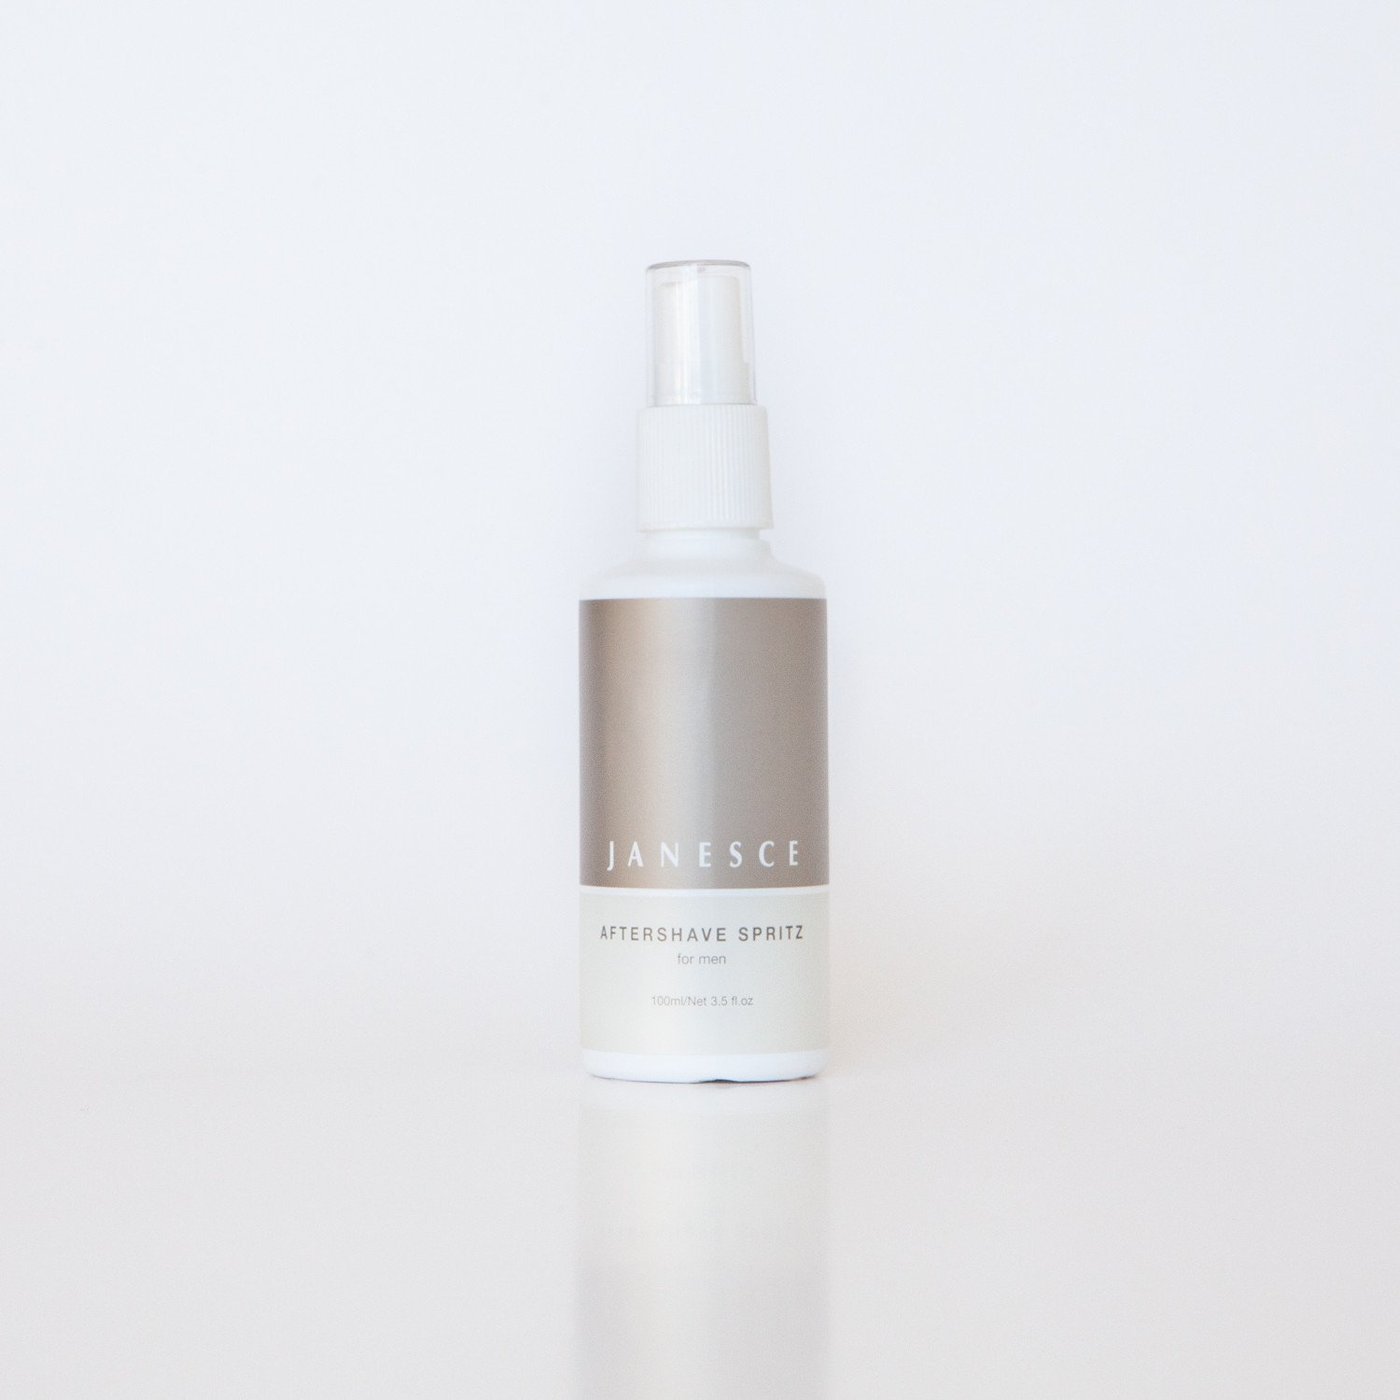 Janesce After Shave Spritz available online at Vital Balance